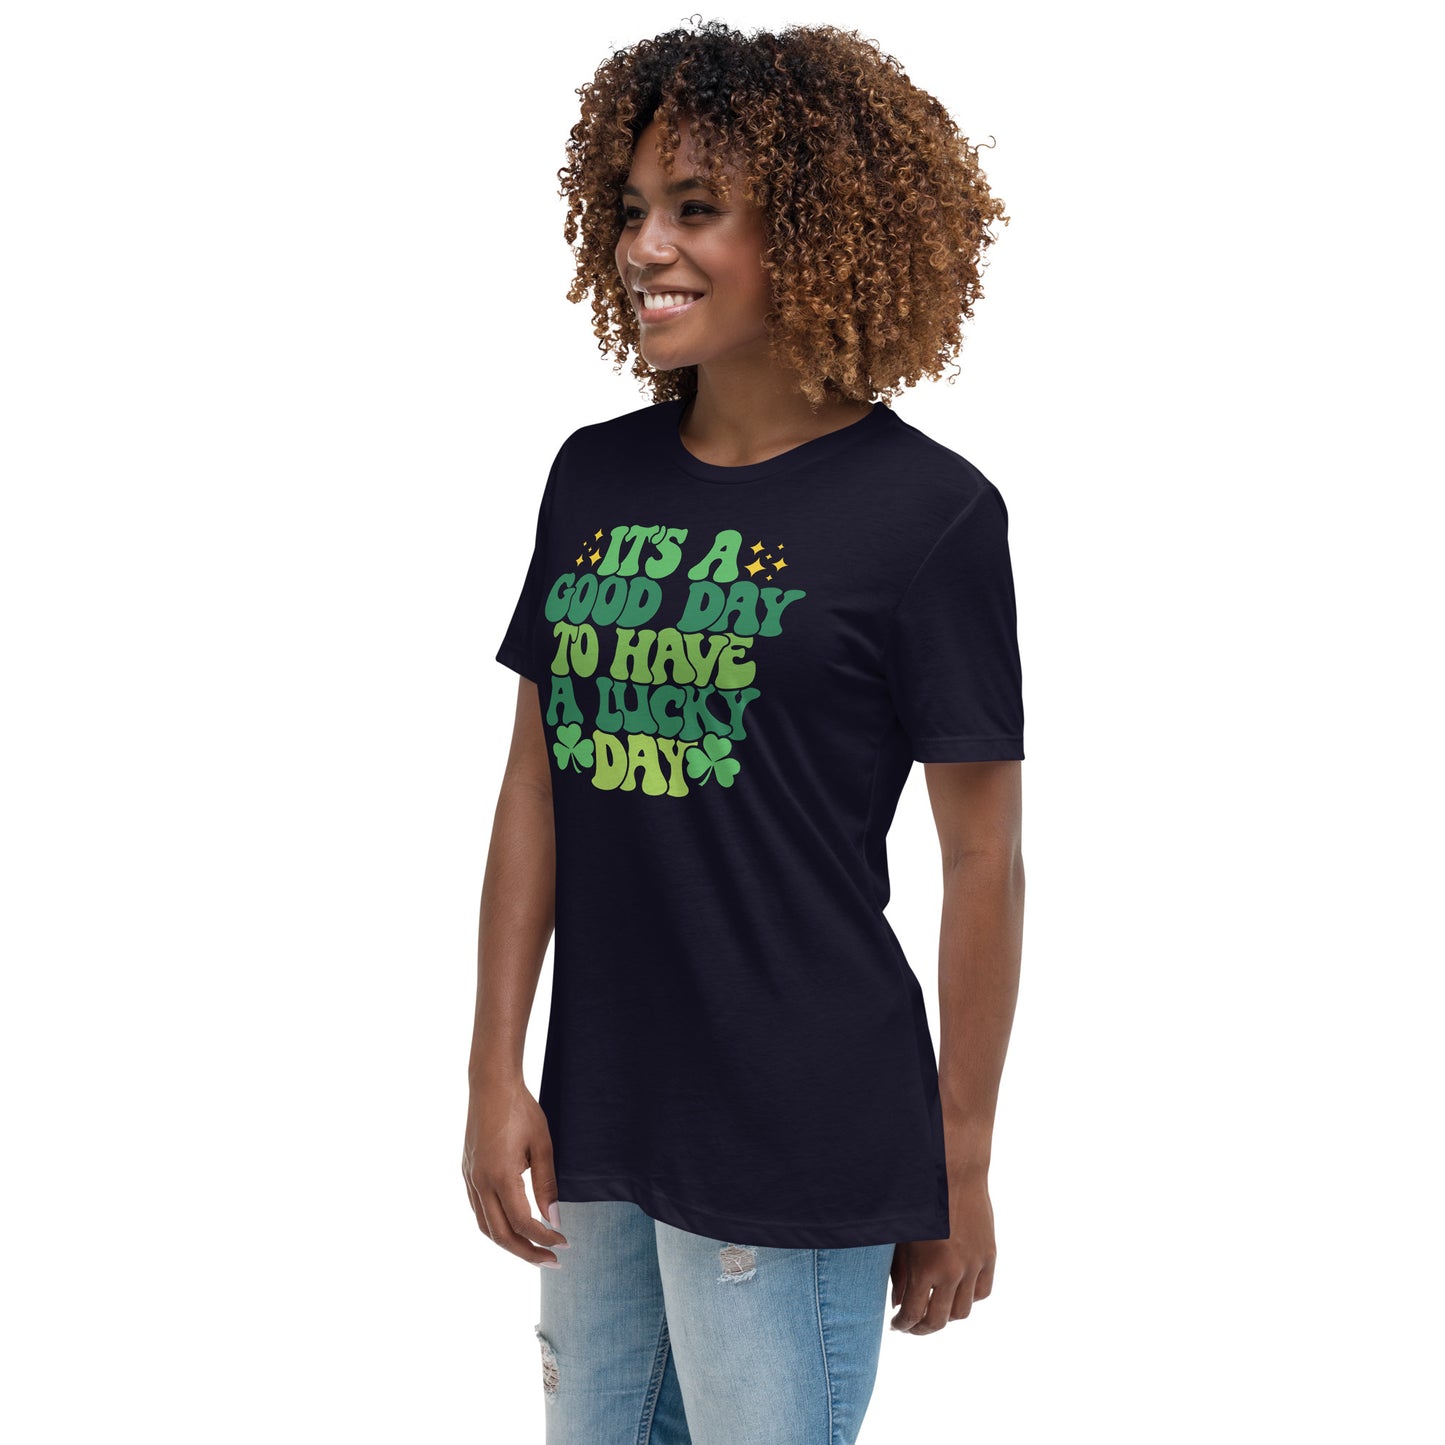 Women's Relaxed T-Shirt - St Patty's Day It's A Good Day to Have a Good Day